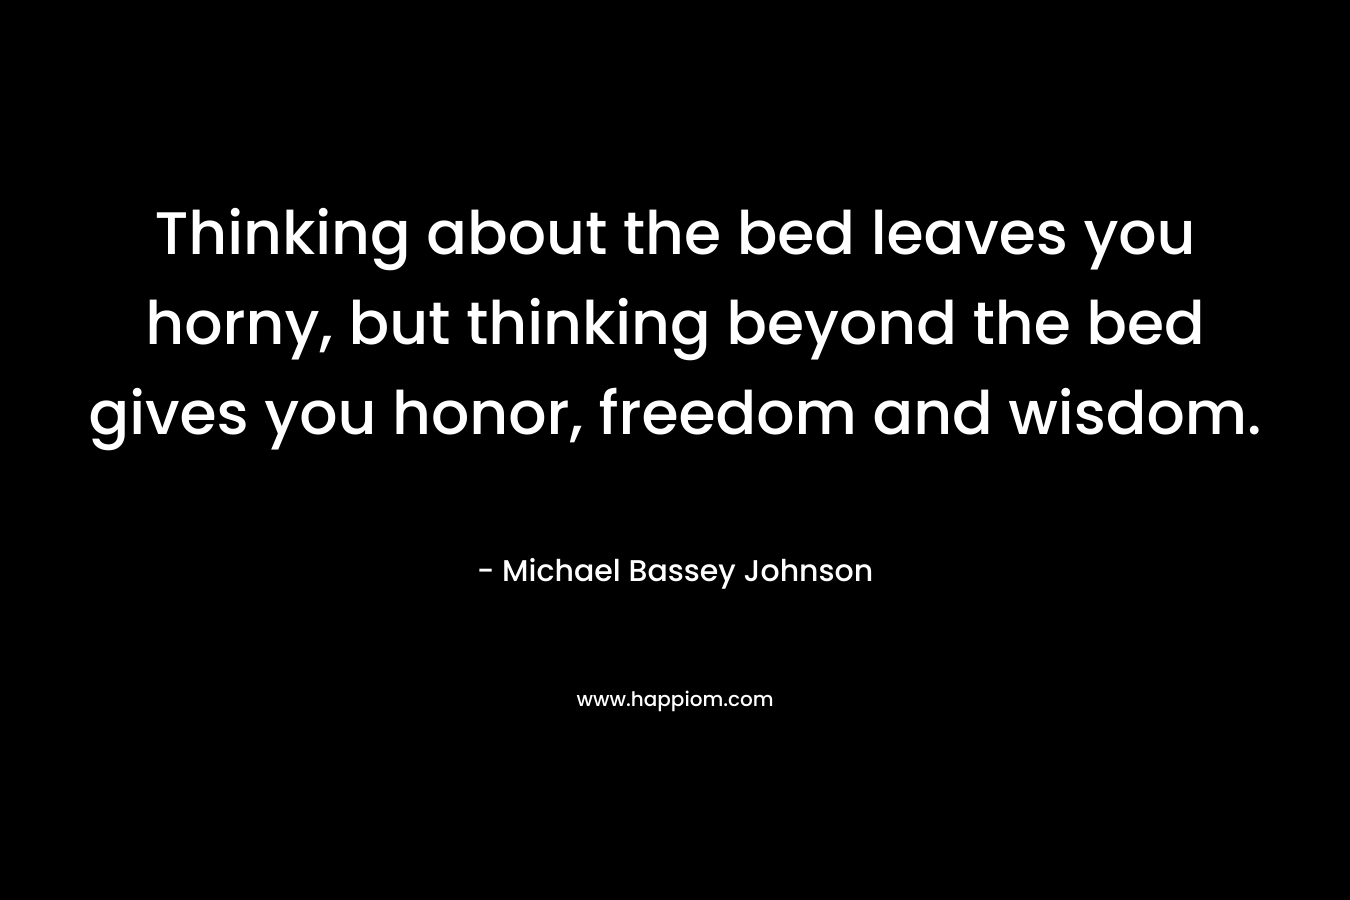 Thinking about the bed leaves you horny, but thinking beyond the bed gives you honor, freedom and wisdom.